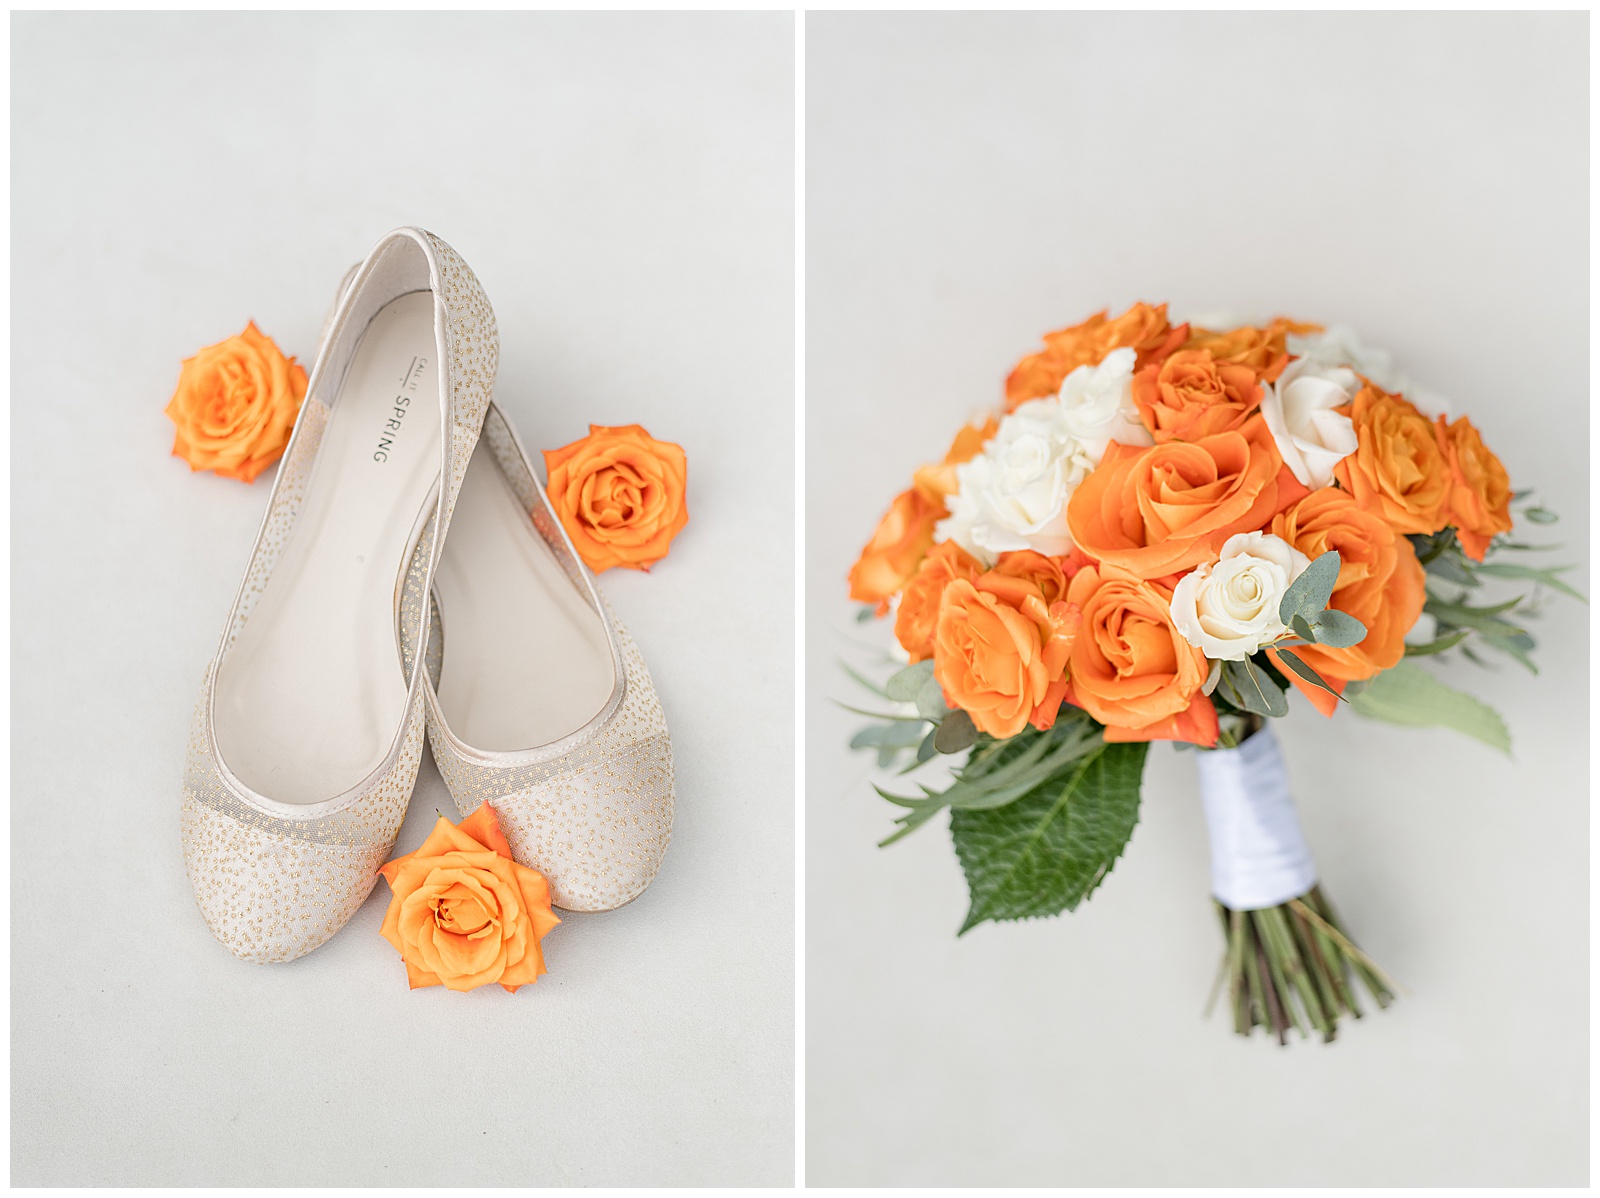 bride's neutral shoes surrounded by orange roses and bride's bouquet filled with orange and white roses